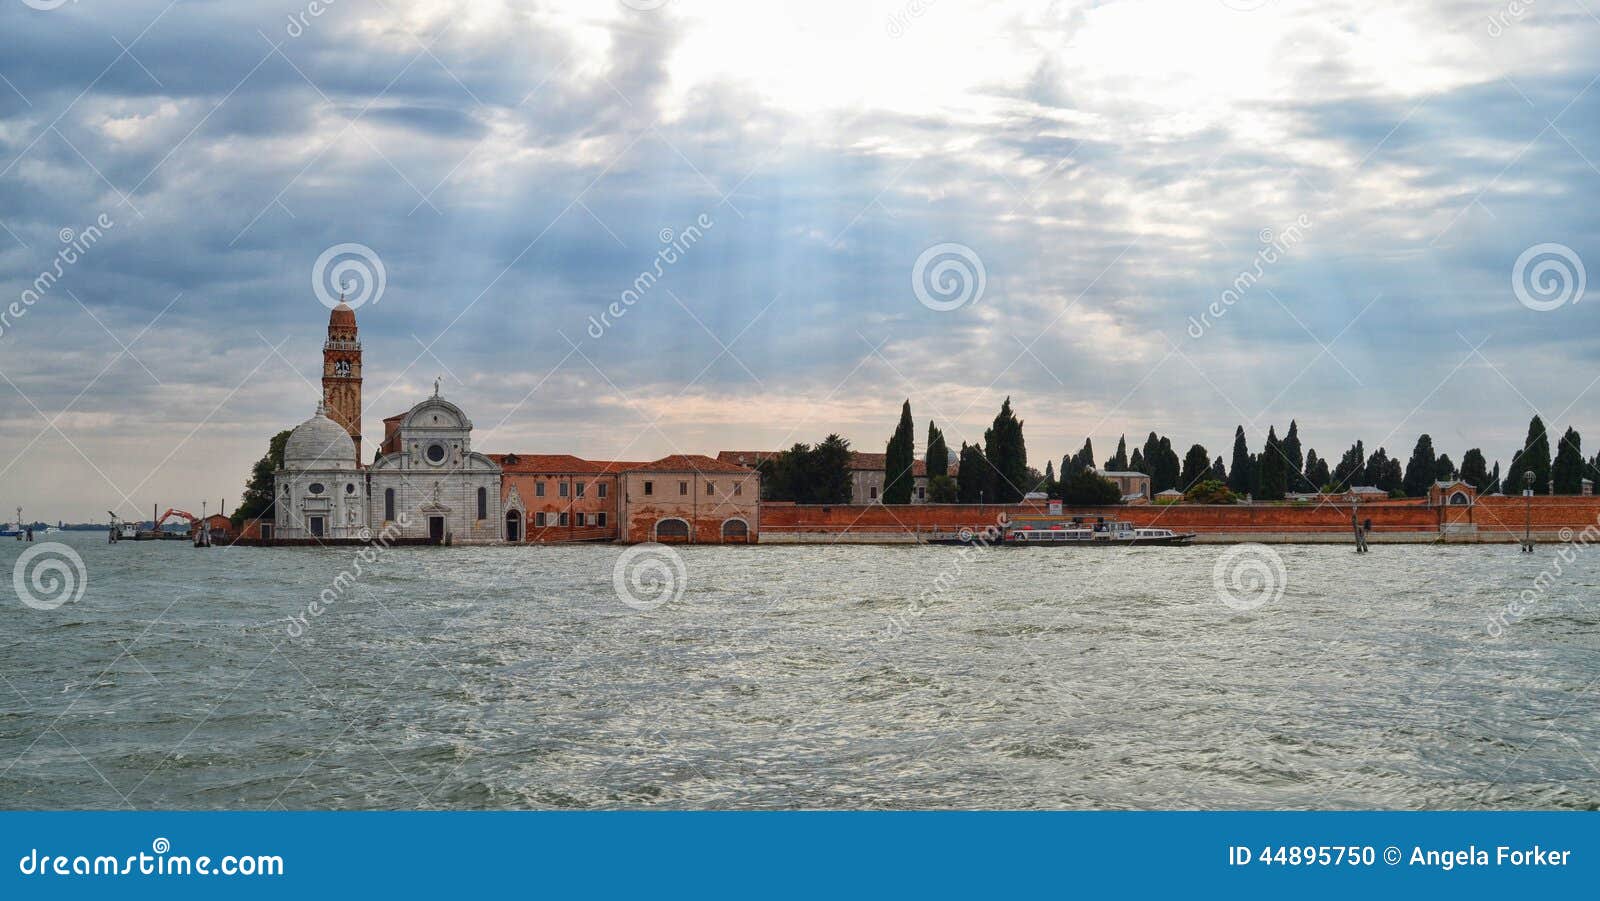 the cemetery island of san michele in venice